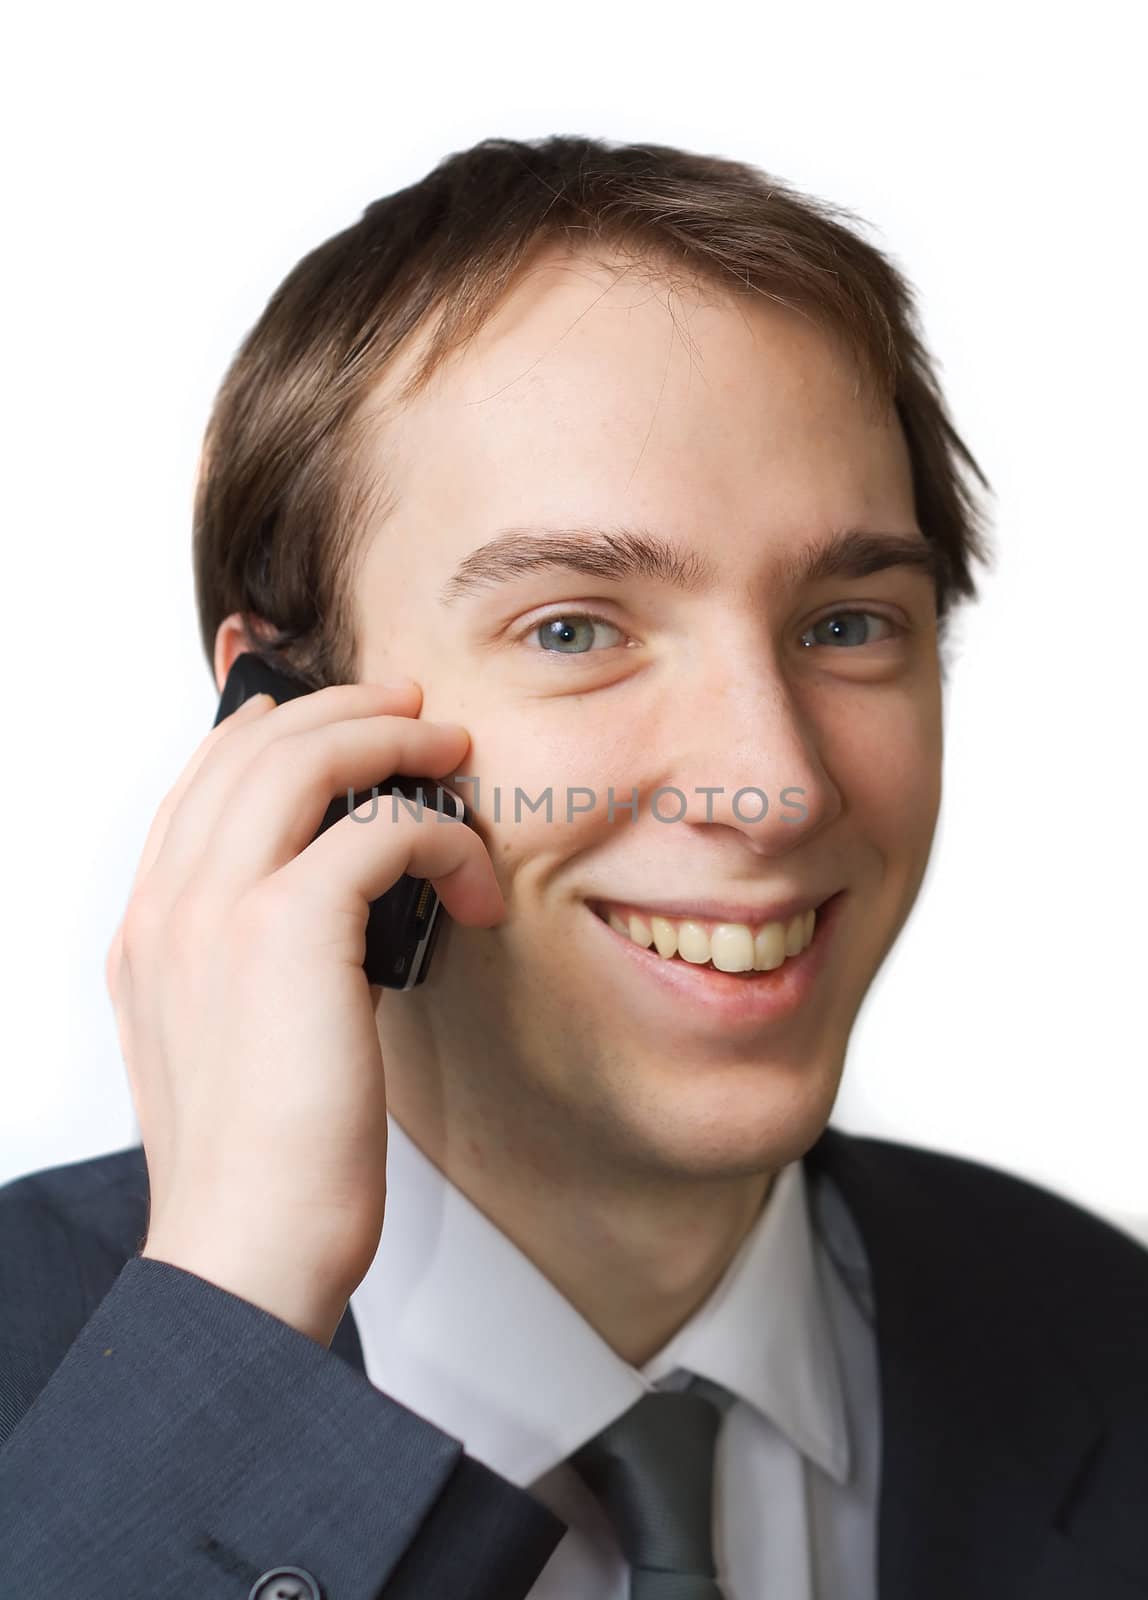 Young professional smiles while on the phone, isolated over white